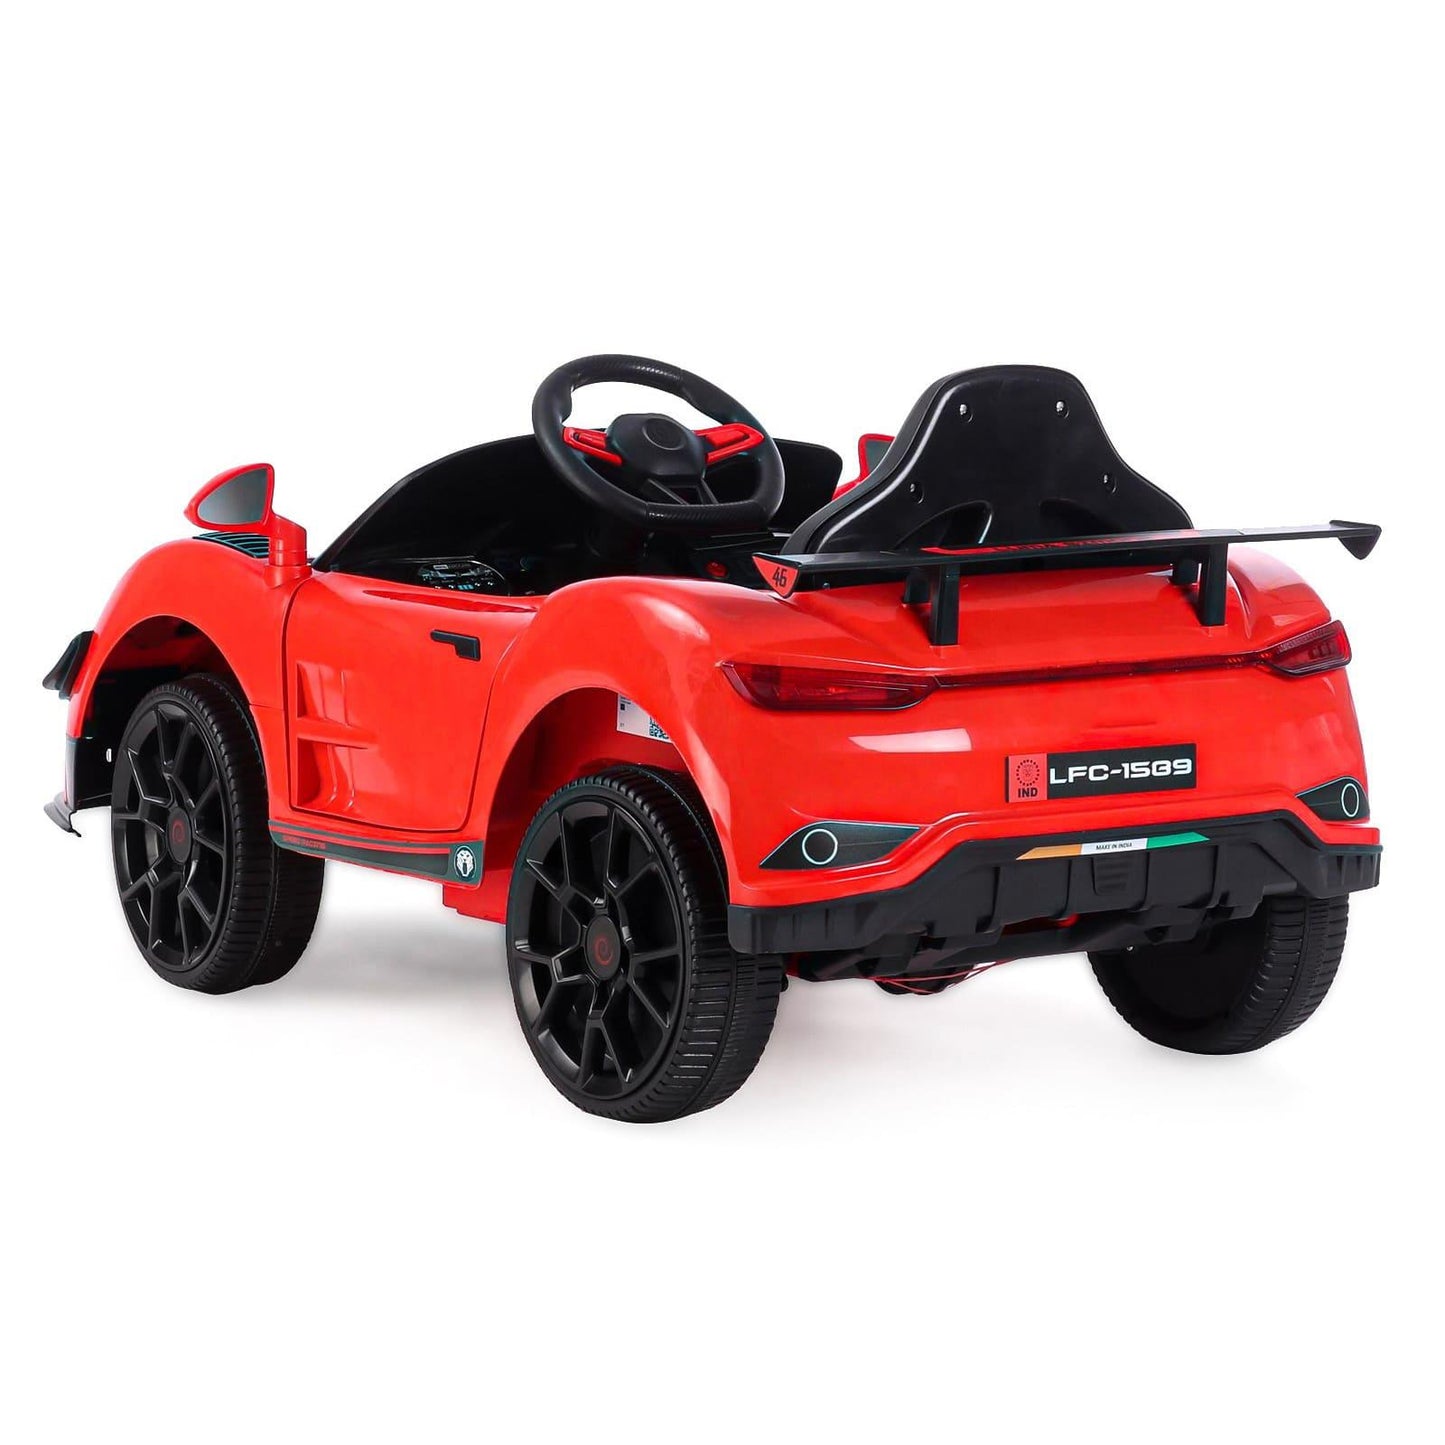 PATOYS | Battery Operated Ride On Car with Music and Lights | LFC-BDQ1589-Red - PATOYS